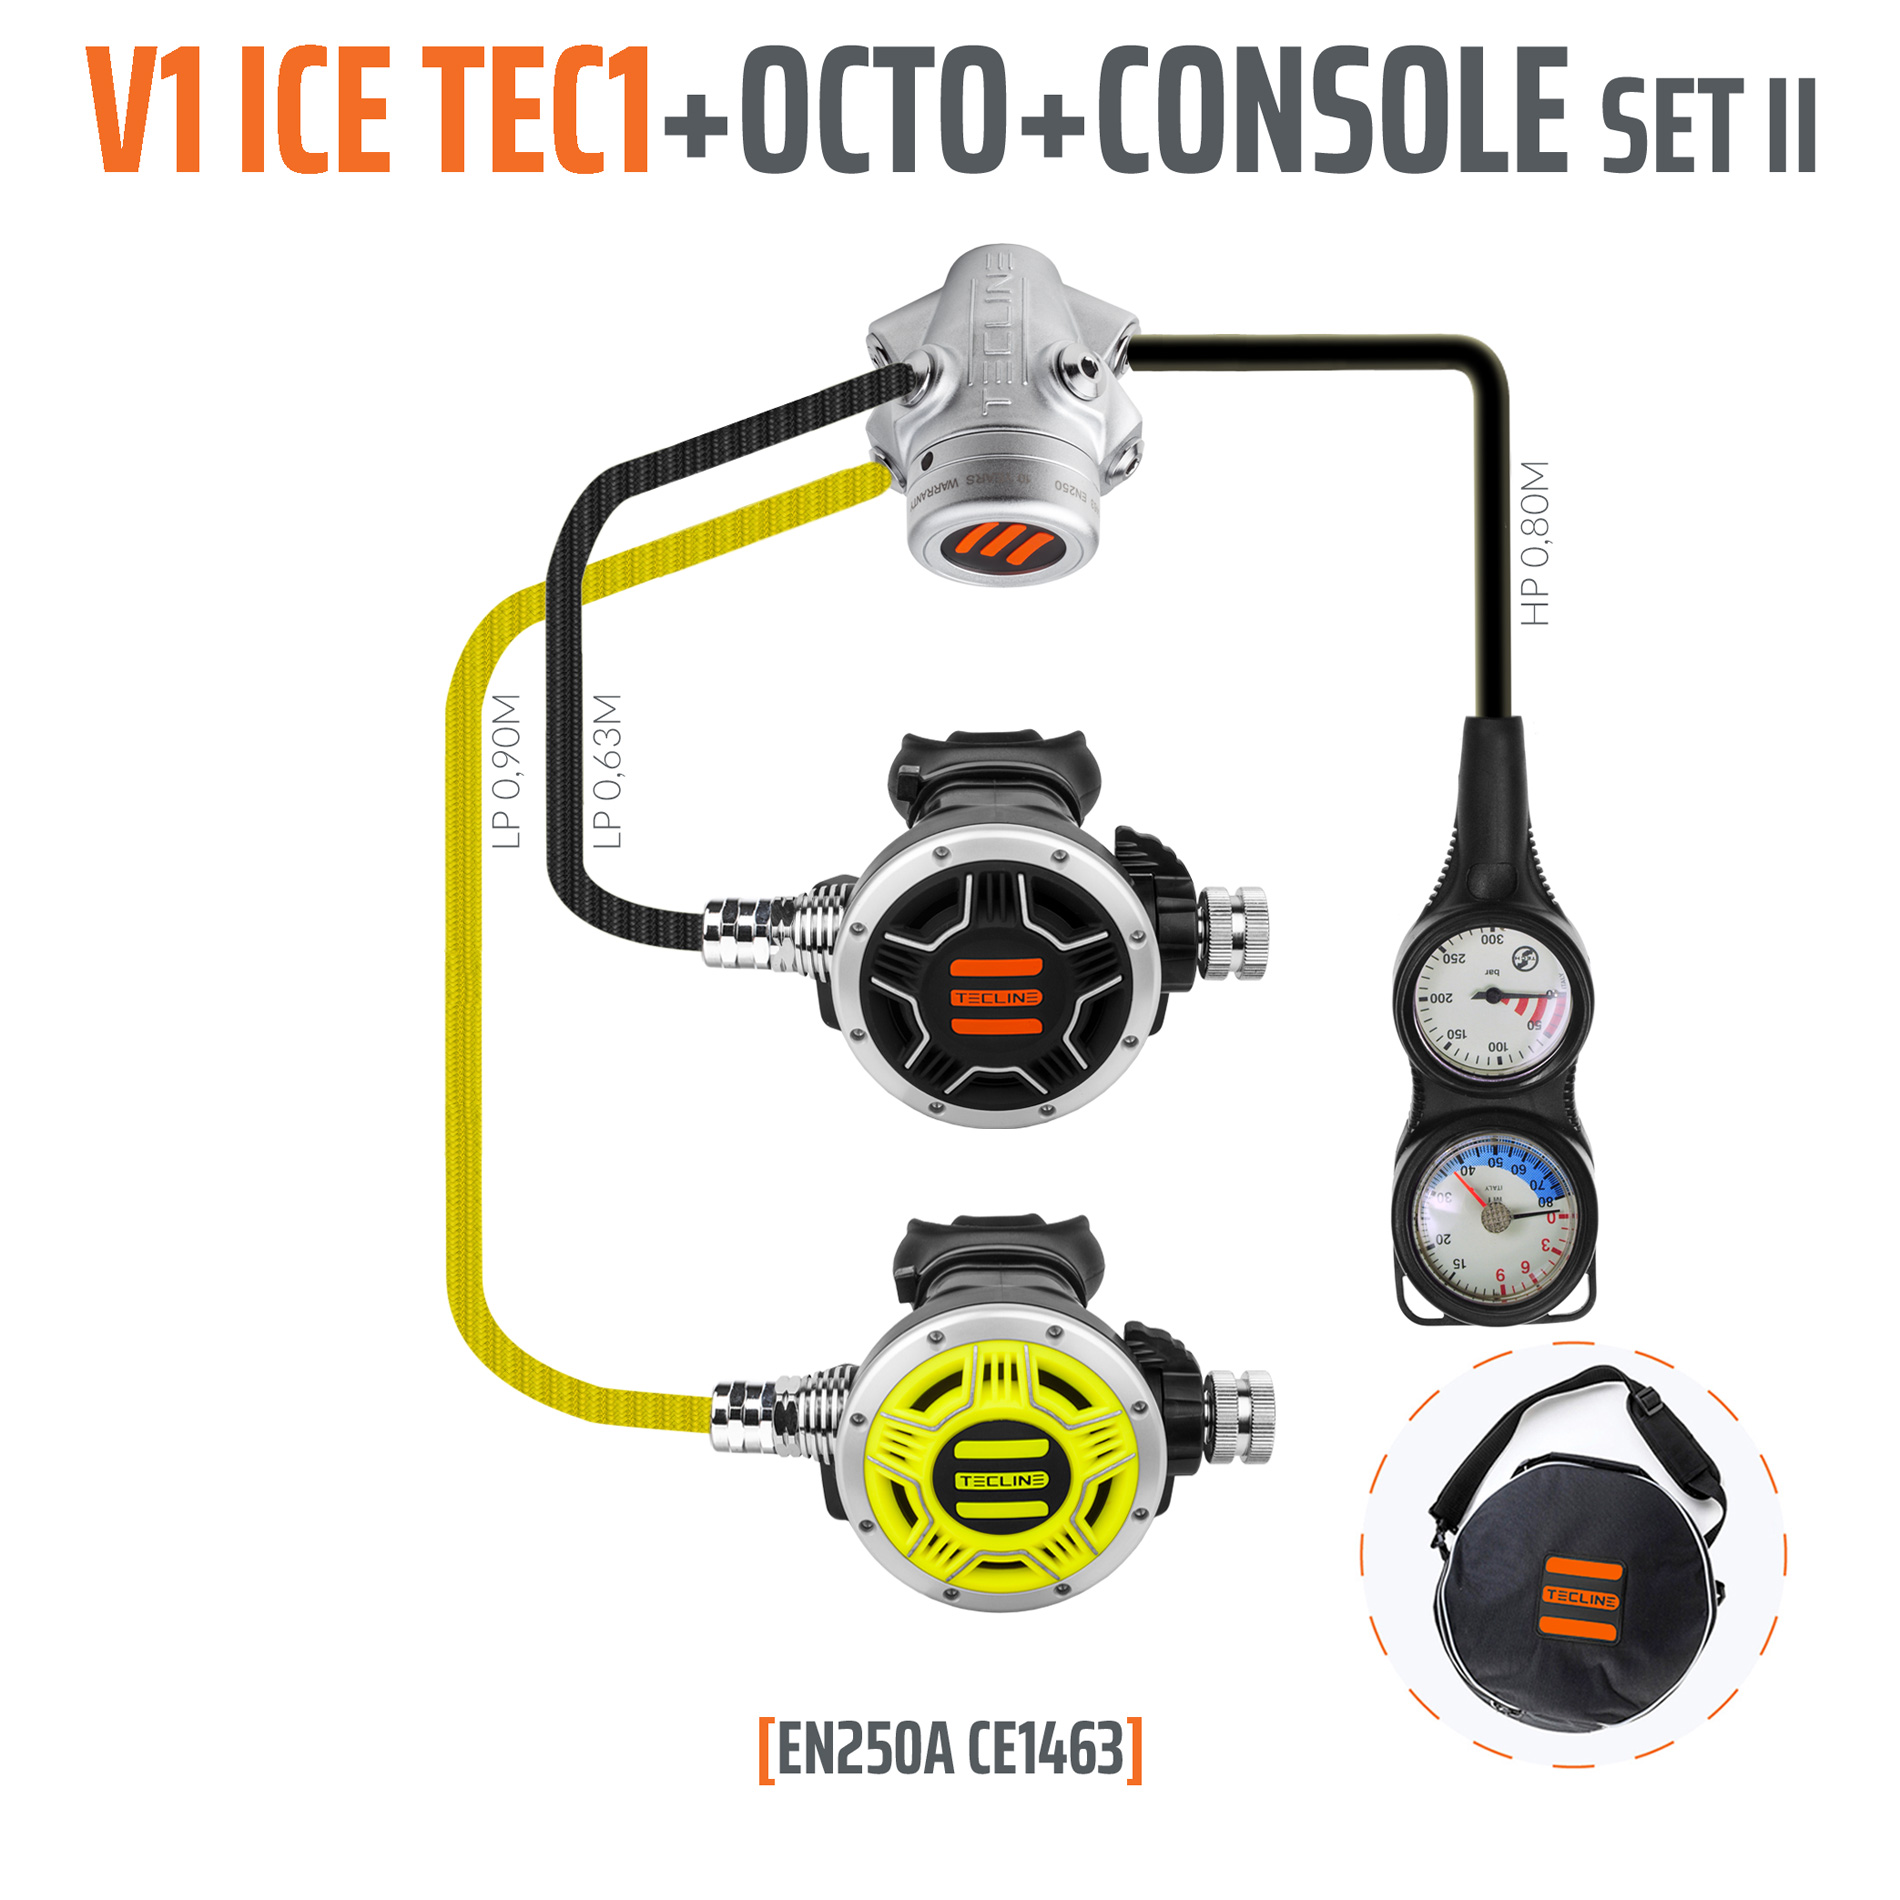 Tecline Regulator V1 ICE TEC1 set II with octo and 2 element console – EN250A